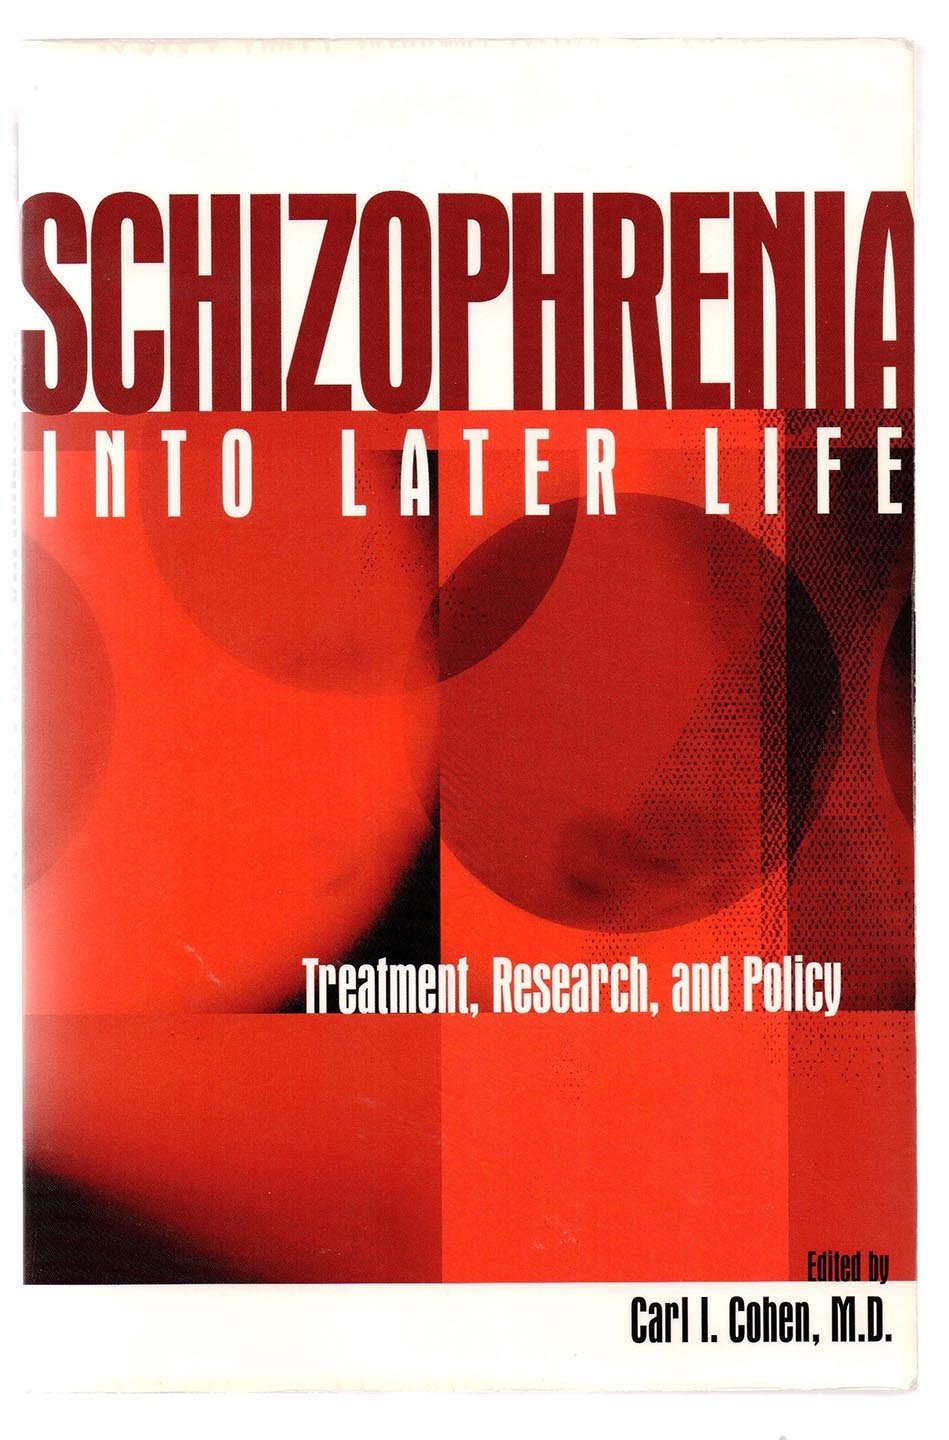 Schizophrenia Into Later Life: Treatment, Research, and Policy